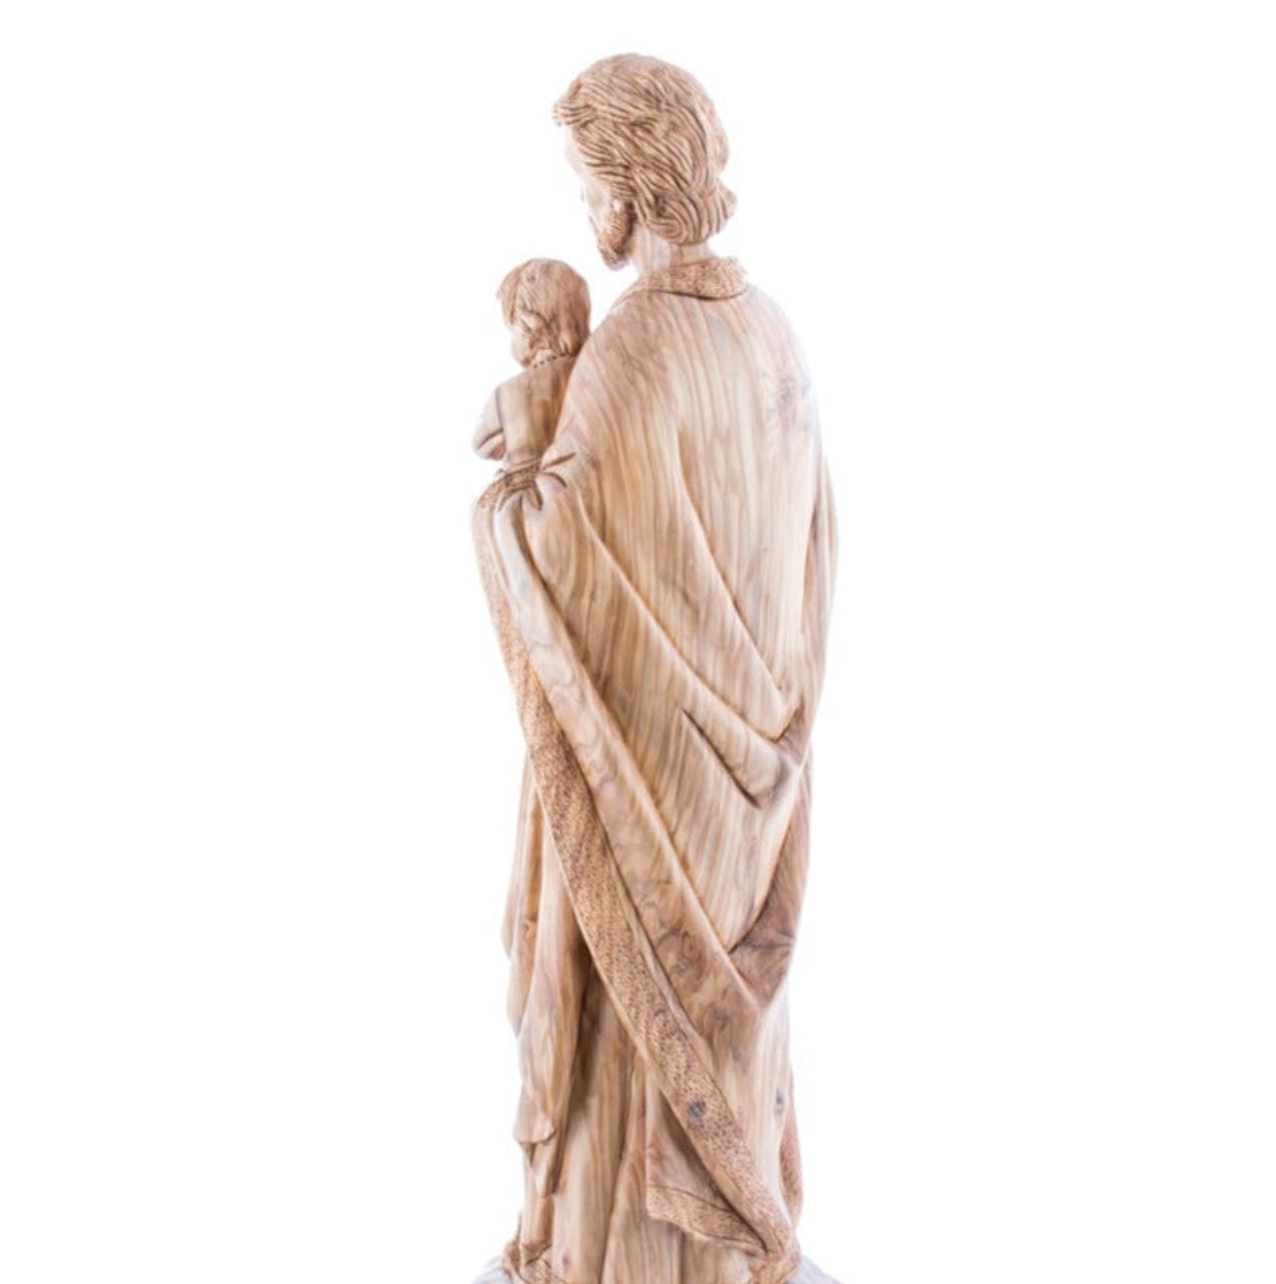 Sculpture of St Joesph Holding the Holy Child Jesus Christ Art from Wood Grown in the Holy Land 